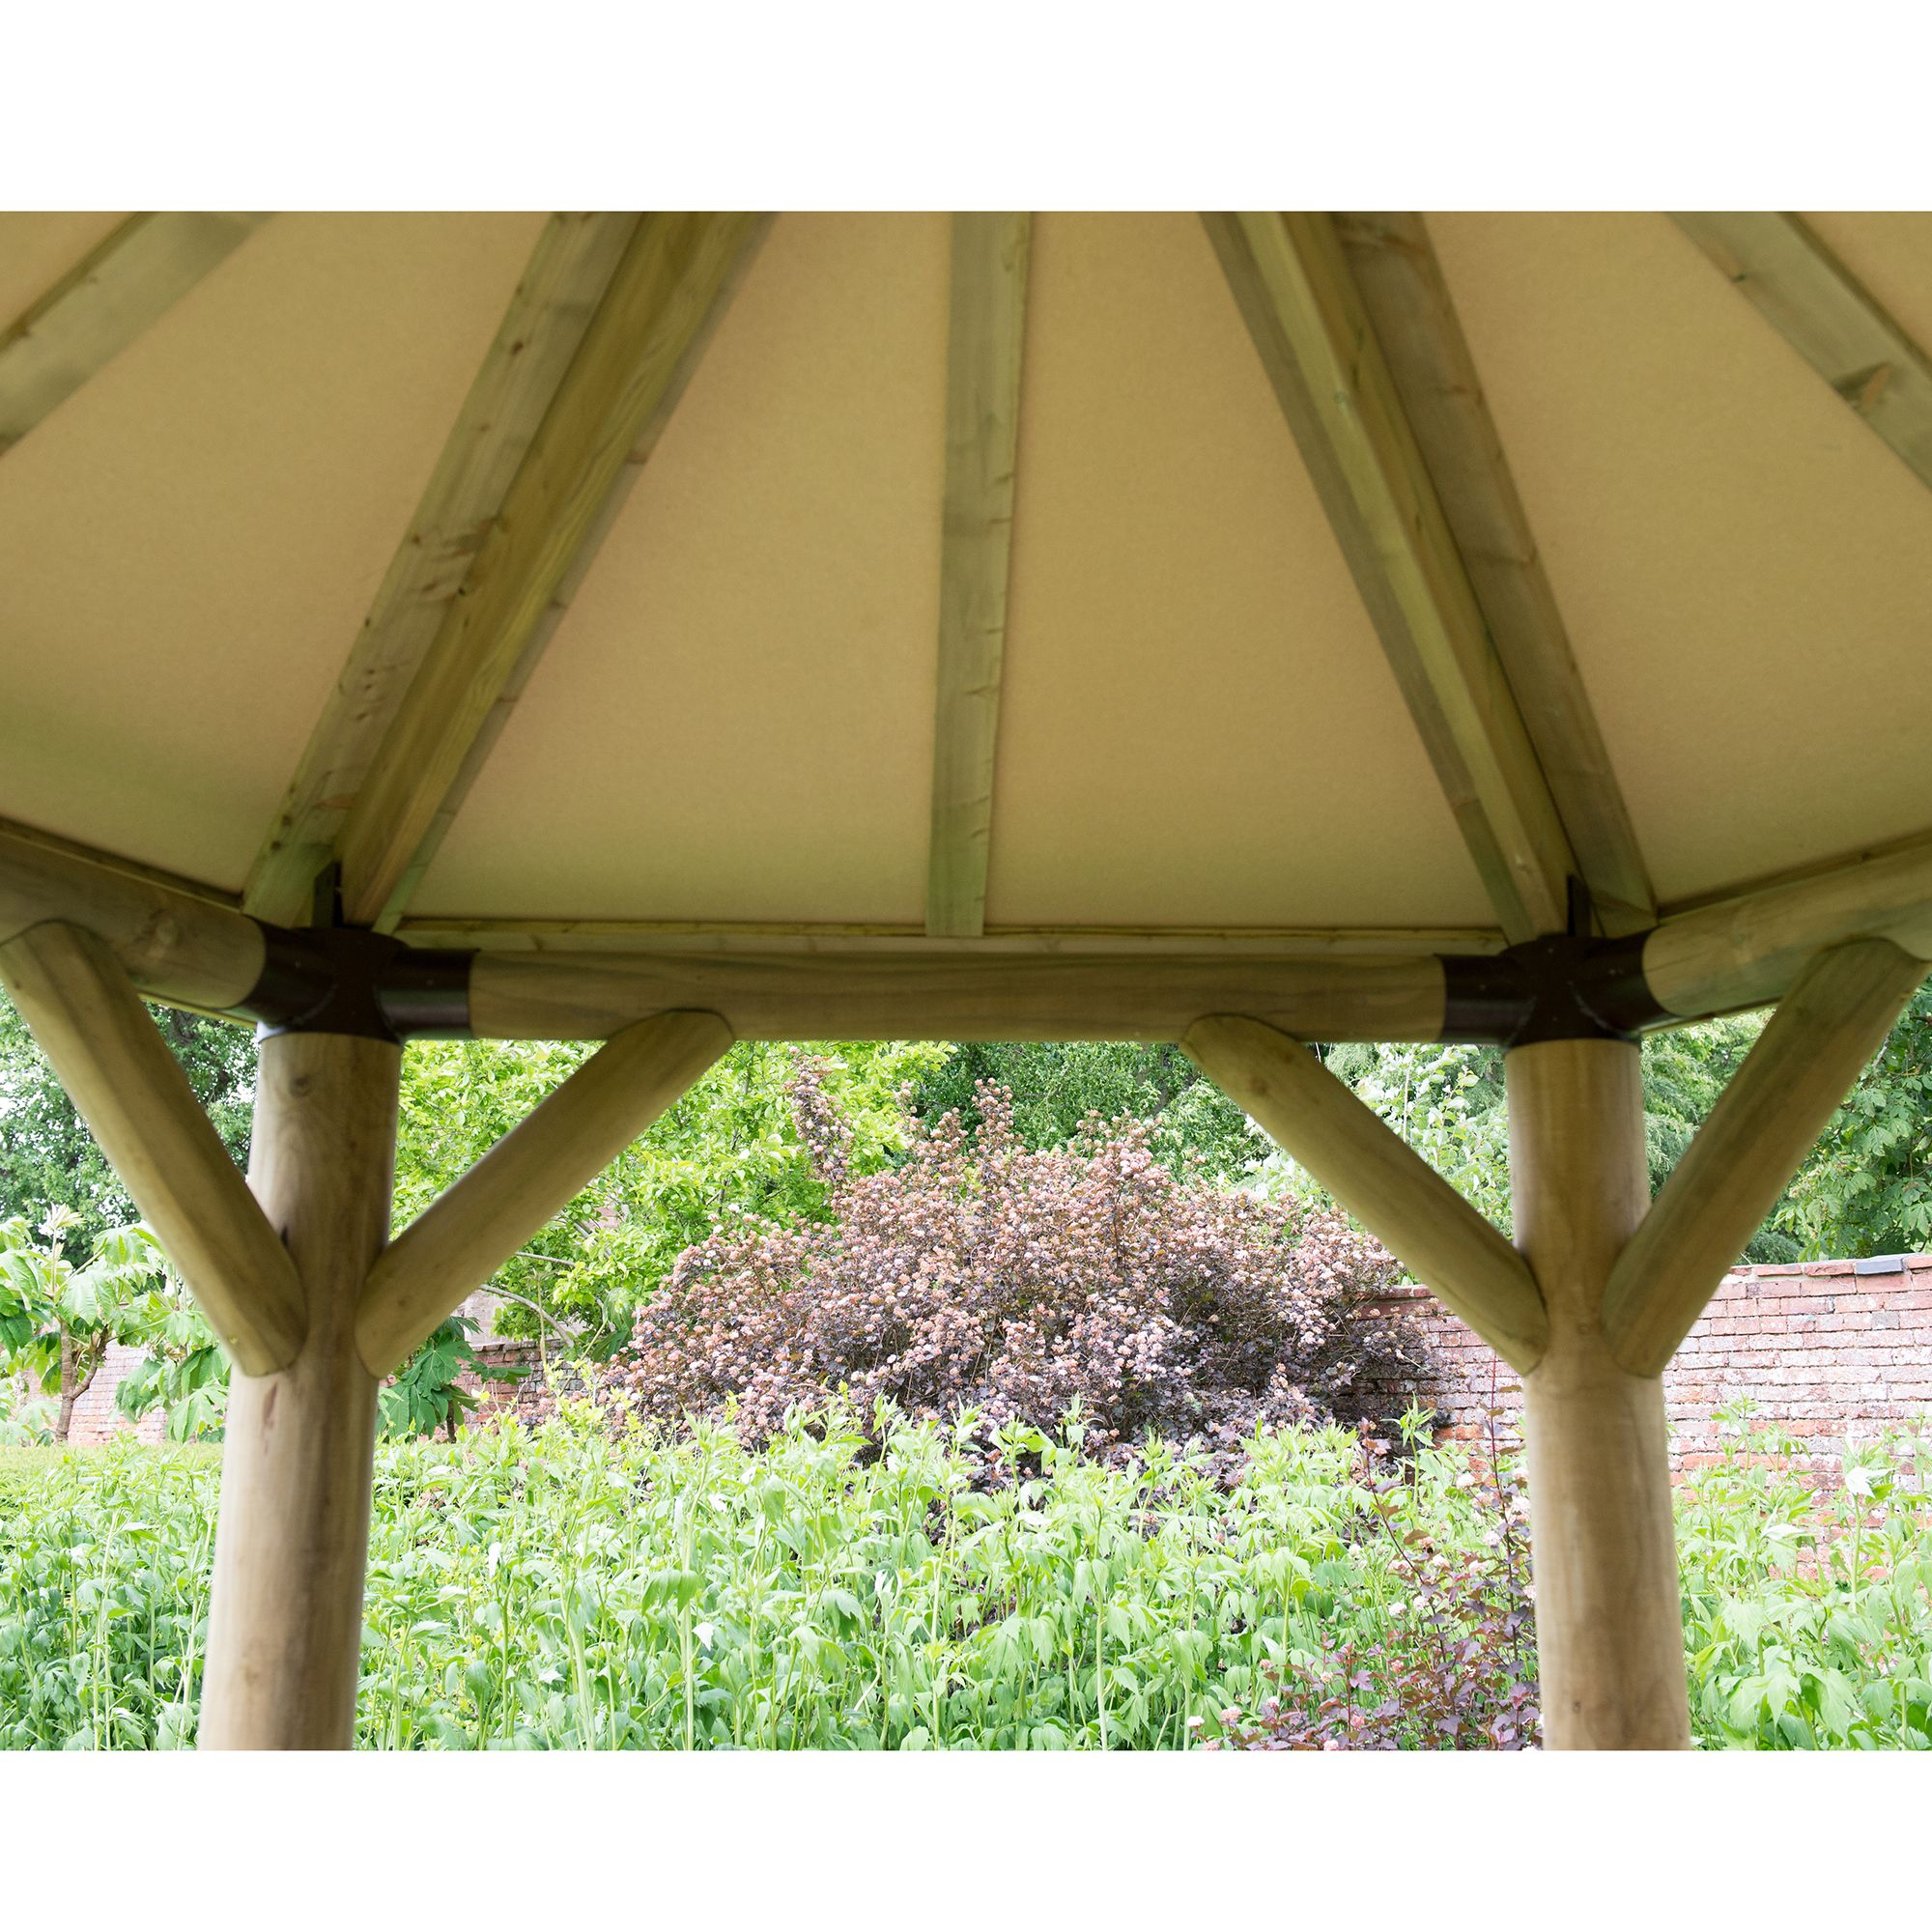 Forest Garden Hexagonal Gazebo with Timber roof, (W)4.9m (D)4.24m with Floor included